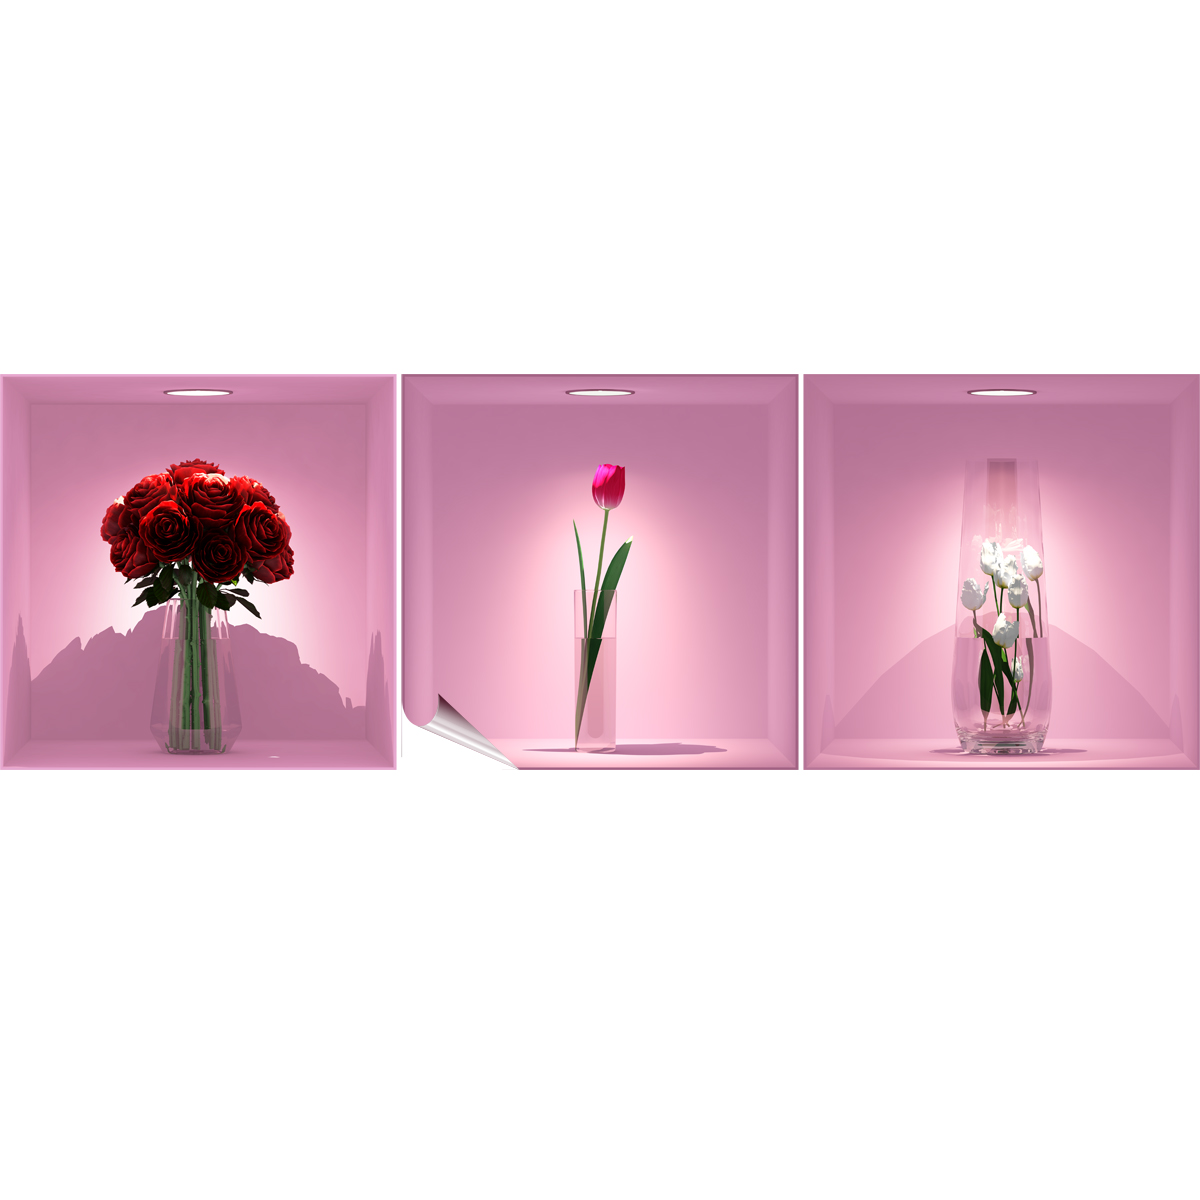 Wall decal 3D effect Red roses flowers